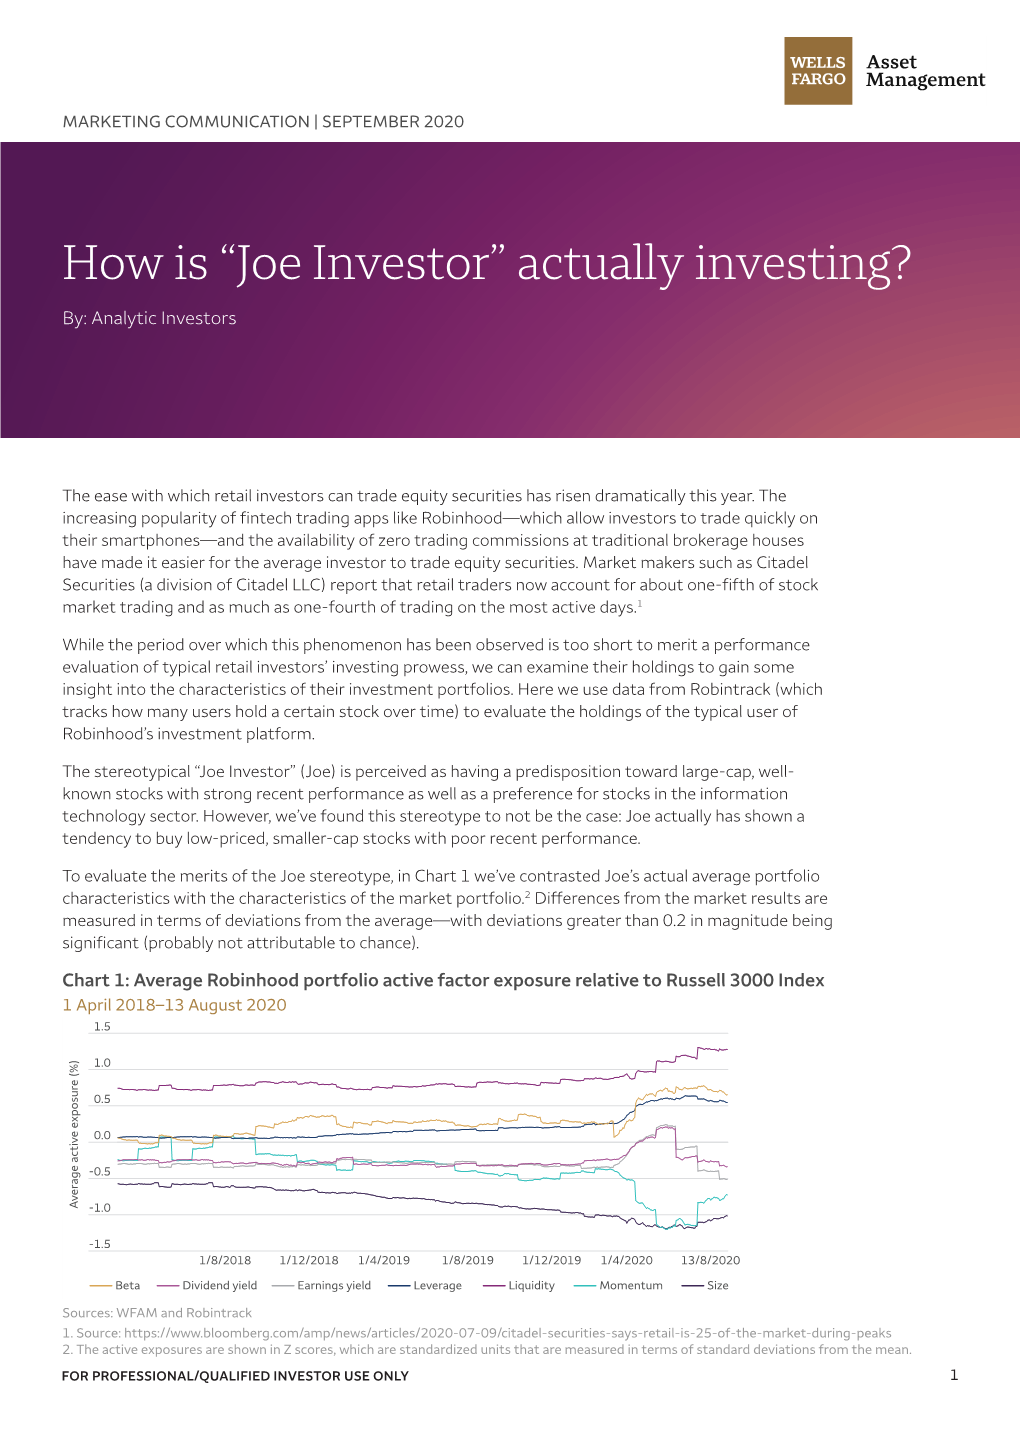 How Is “Joe Investor” Actually Investing? By: Analytic Investors